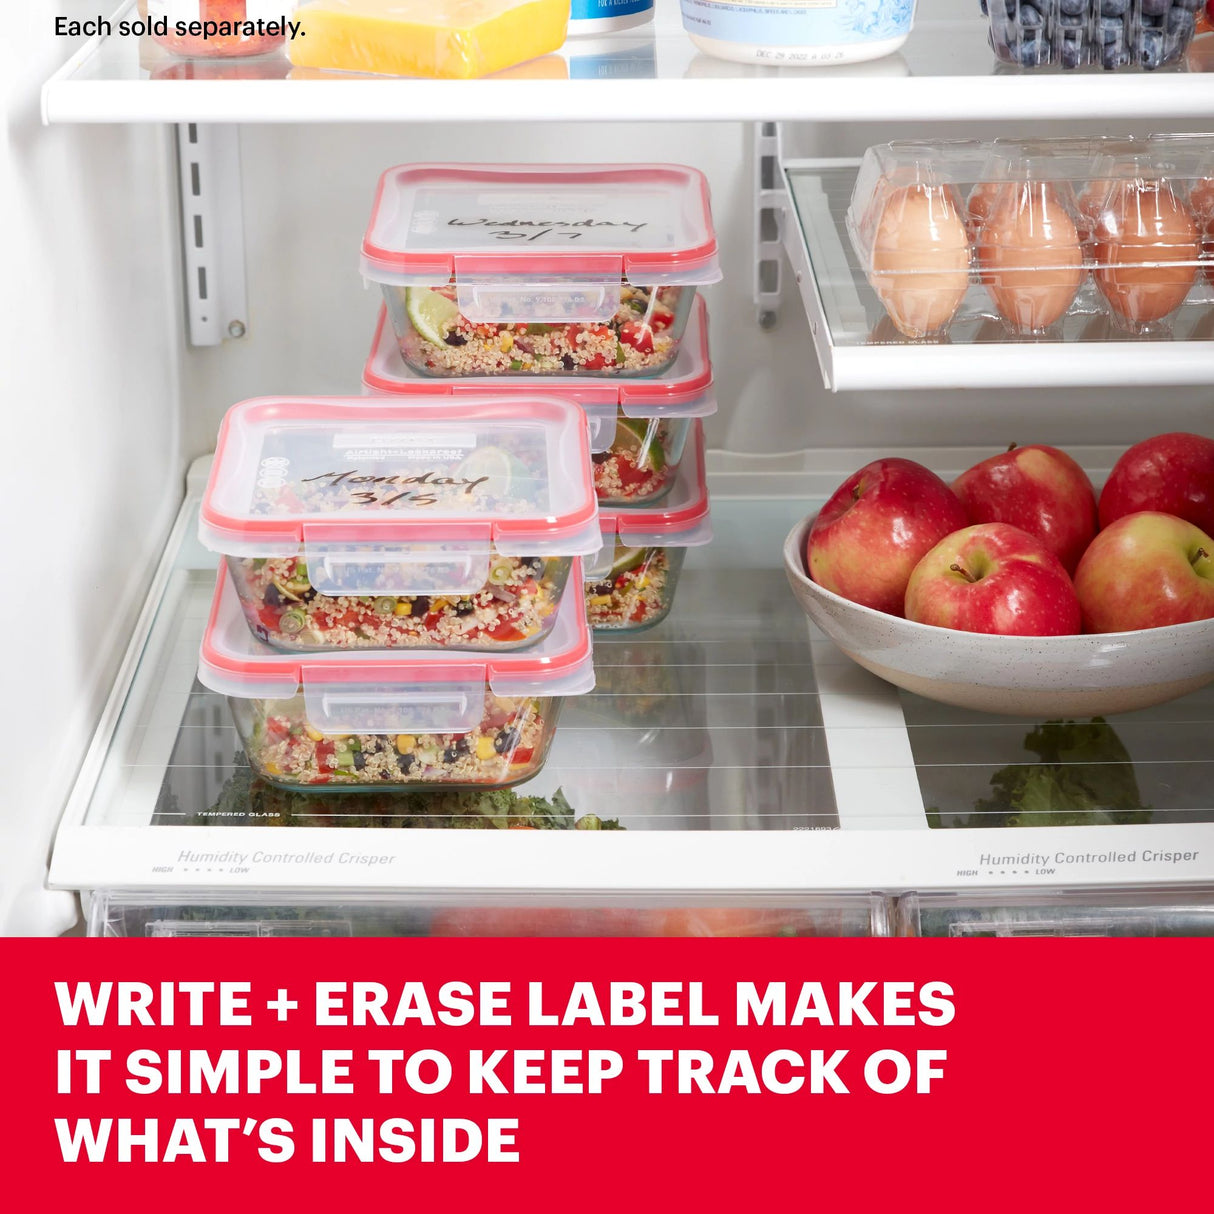 Freshlock 4 cup Square Storage with text write & erase label makes it simple to keep track of what's inside